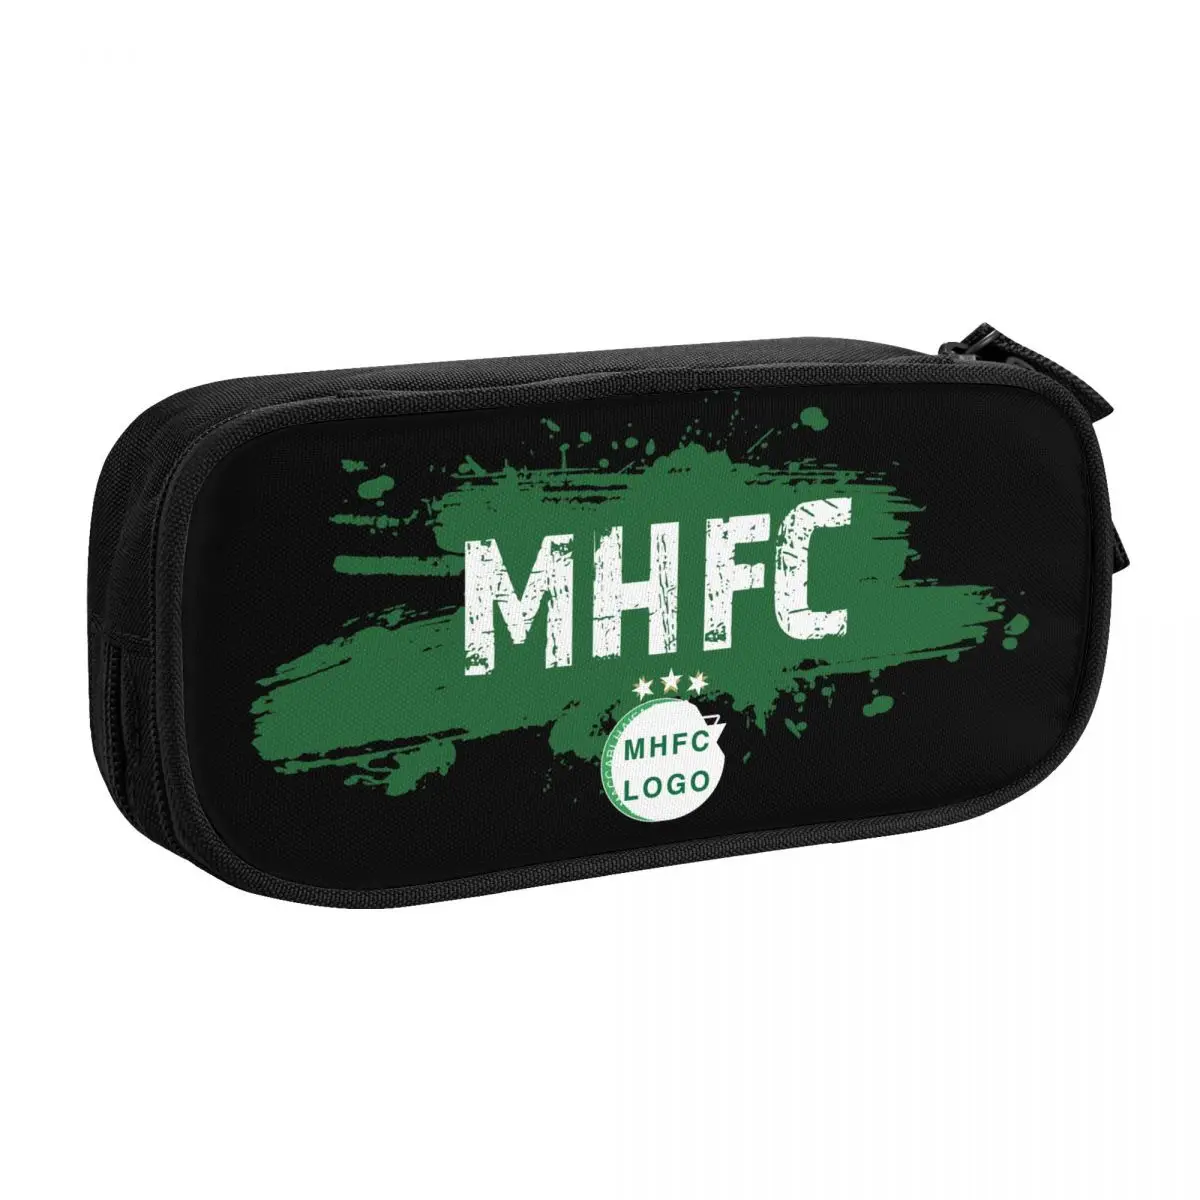 

Israel F.C MHFC Champion Big Capacity Pencil Pen Case Stationery Bag Pouch Holder Box Organizer for Teens Girls Adults Student